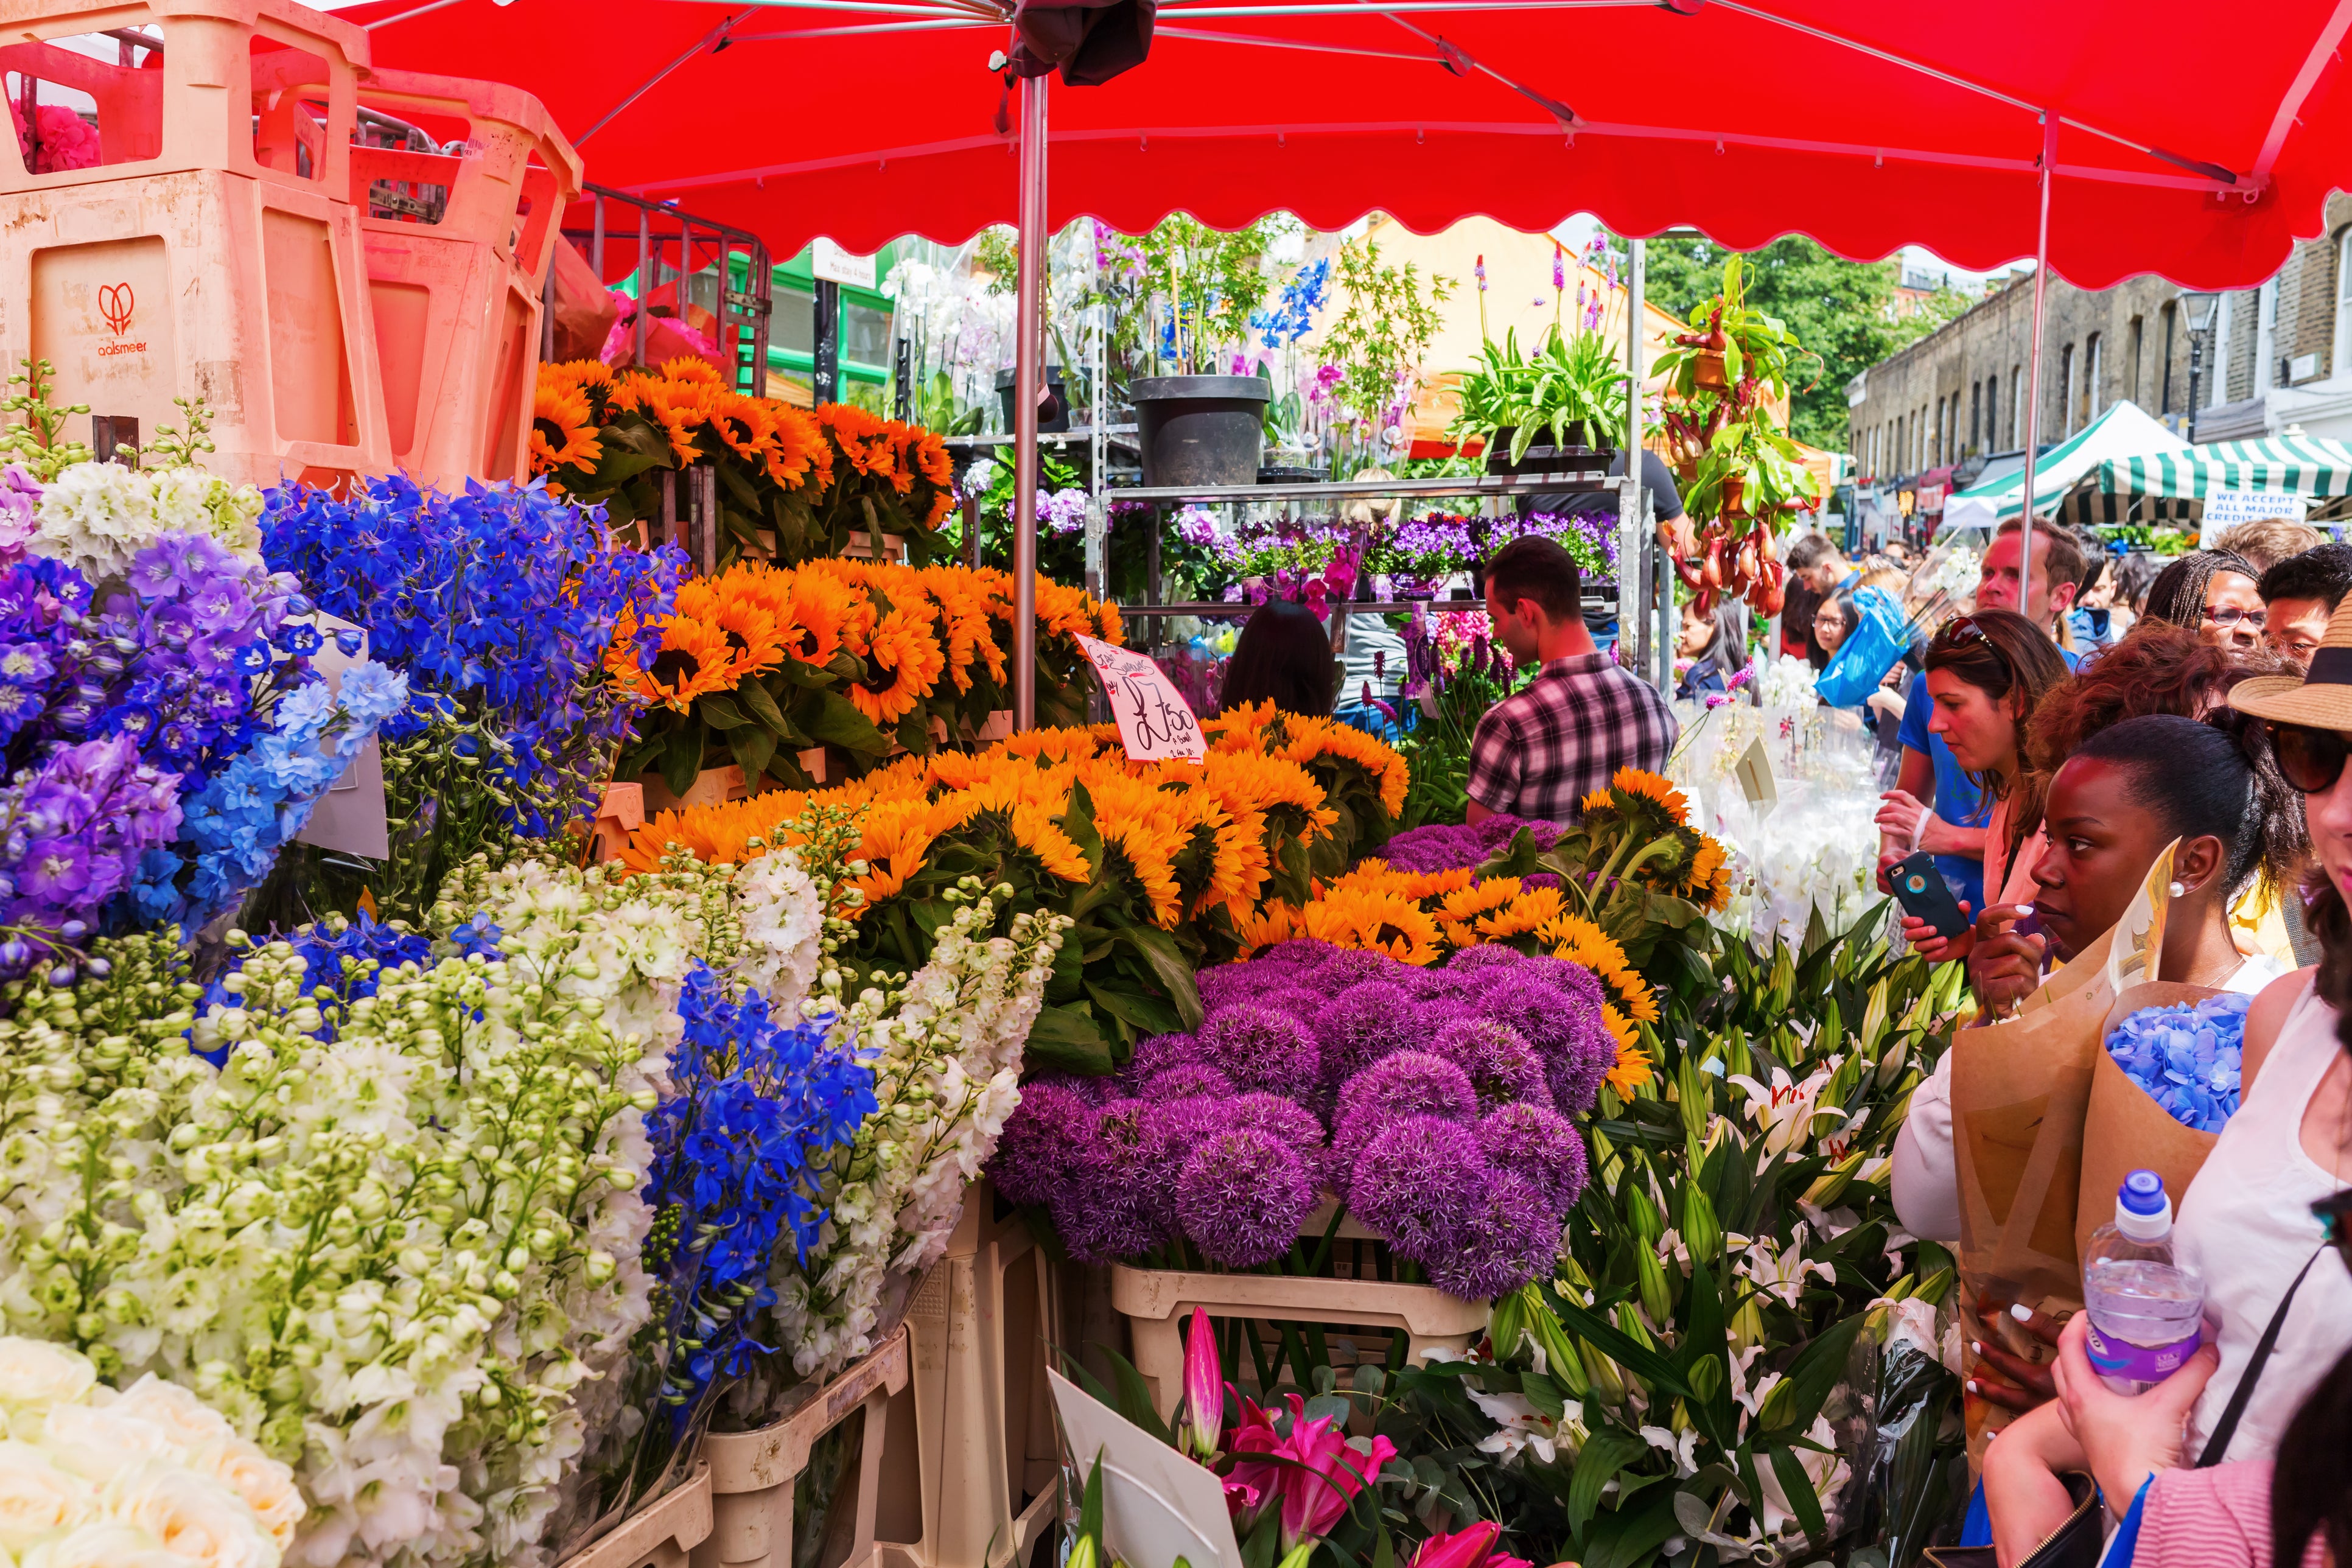 Spend a Sunday morning at Columbia Road Flower Market